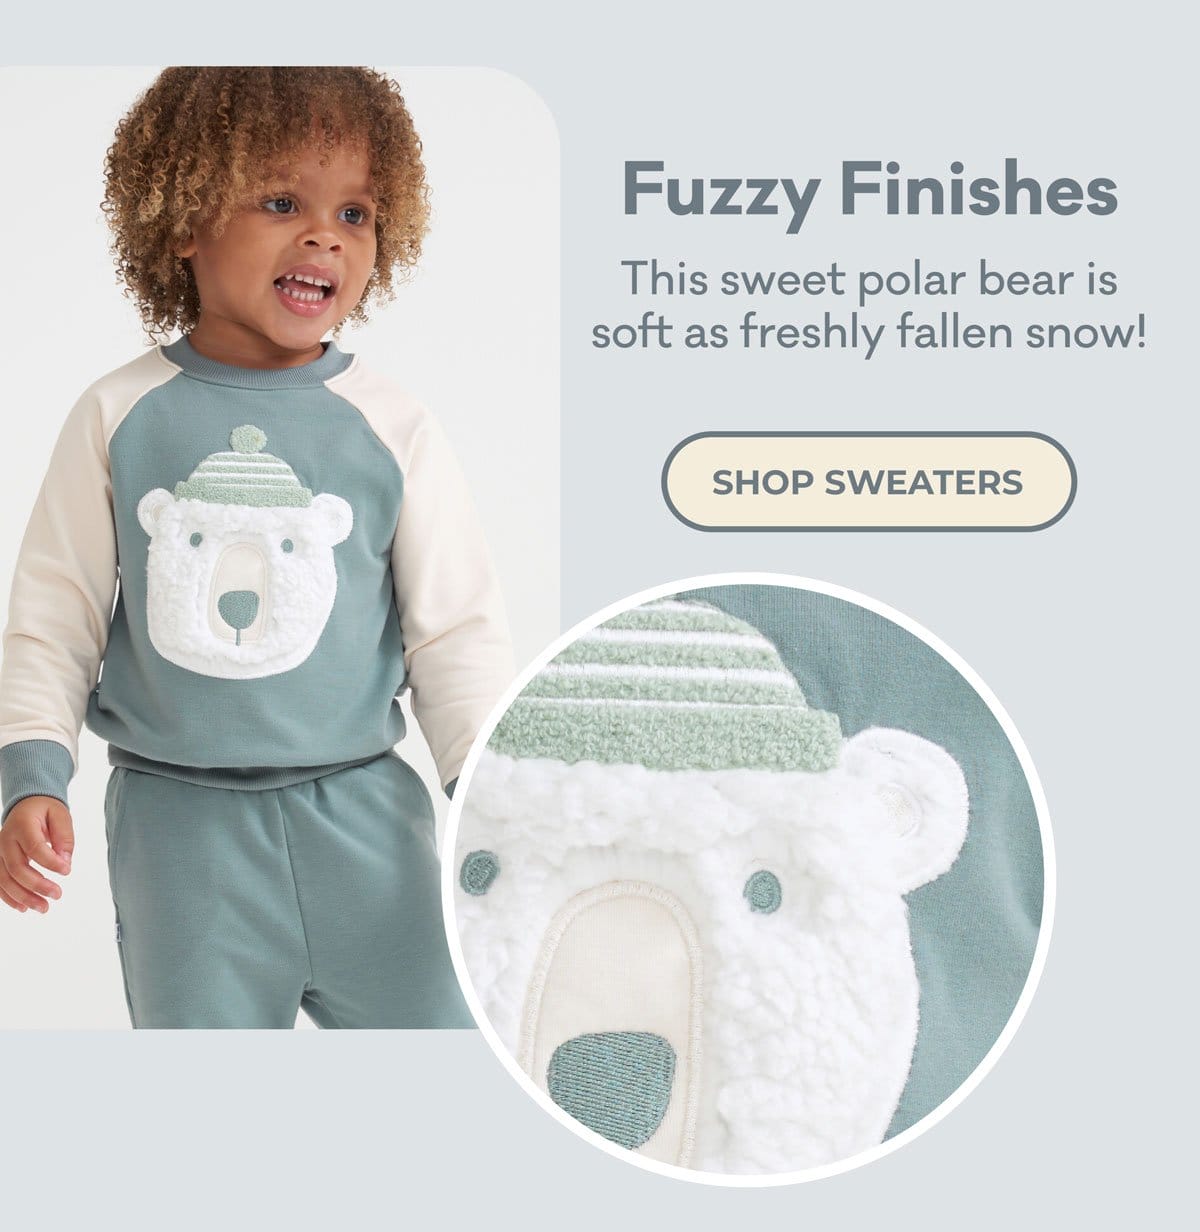 Fuzzy Finishes | This sweet polar bear is soft as freshly fallen snow! | SHOP SWEATERS